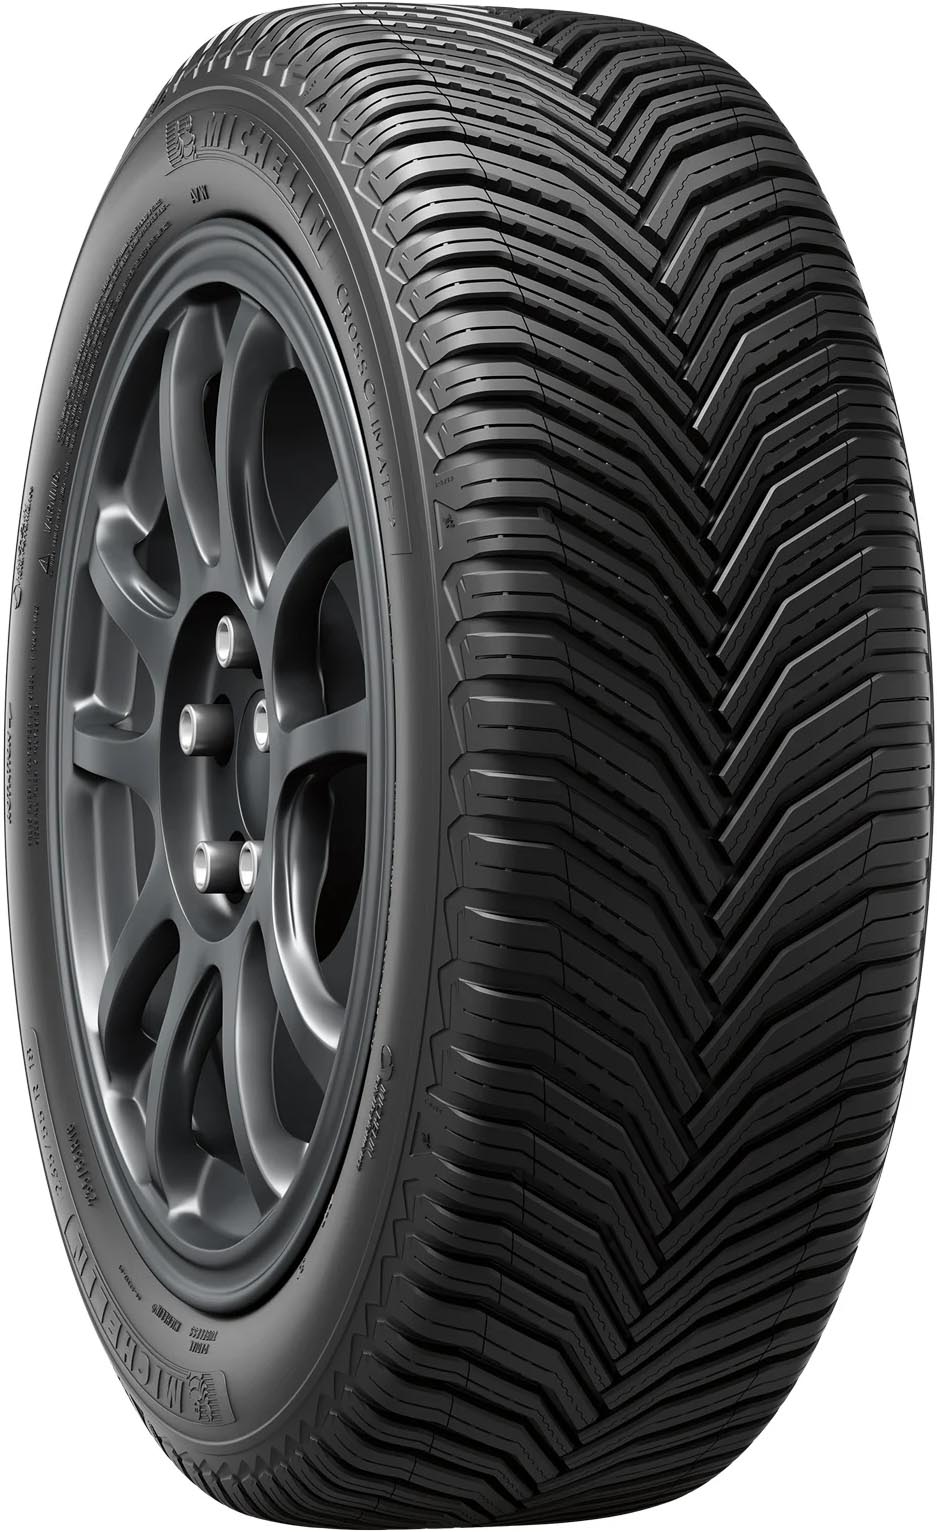 Anvelope auto MICHELIN CROSSCLIMATE 2 A/W XL 285/40 R20 108V